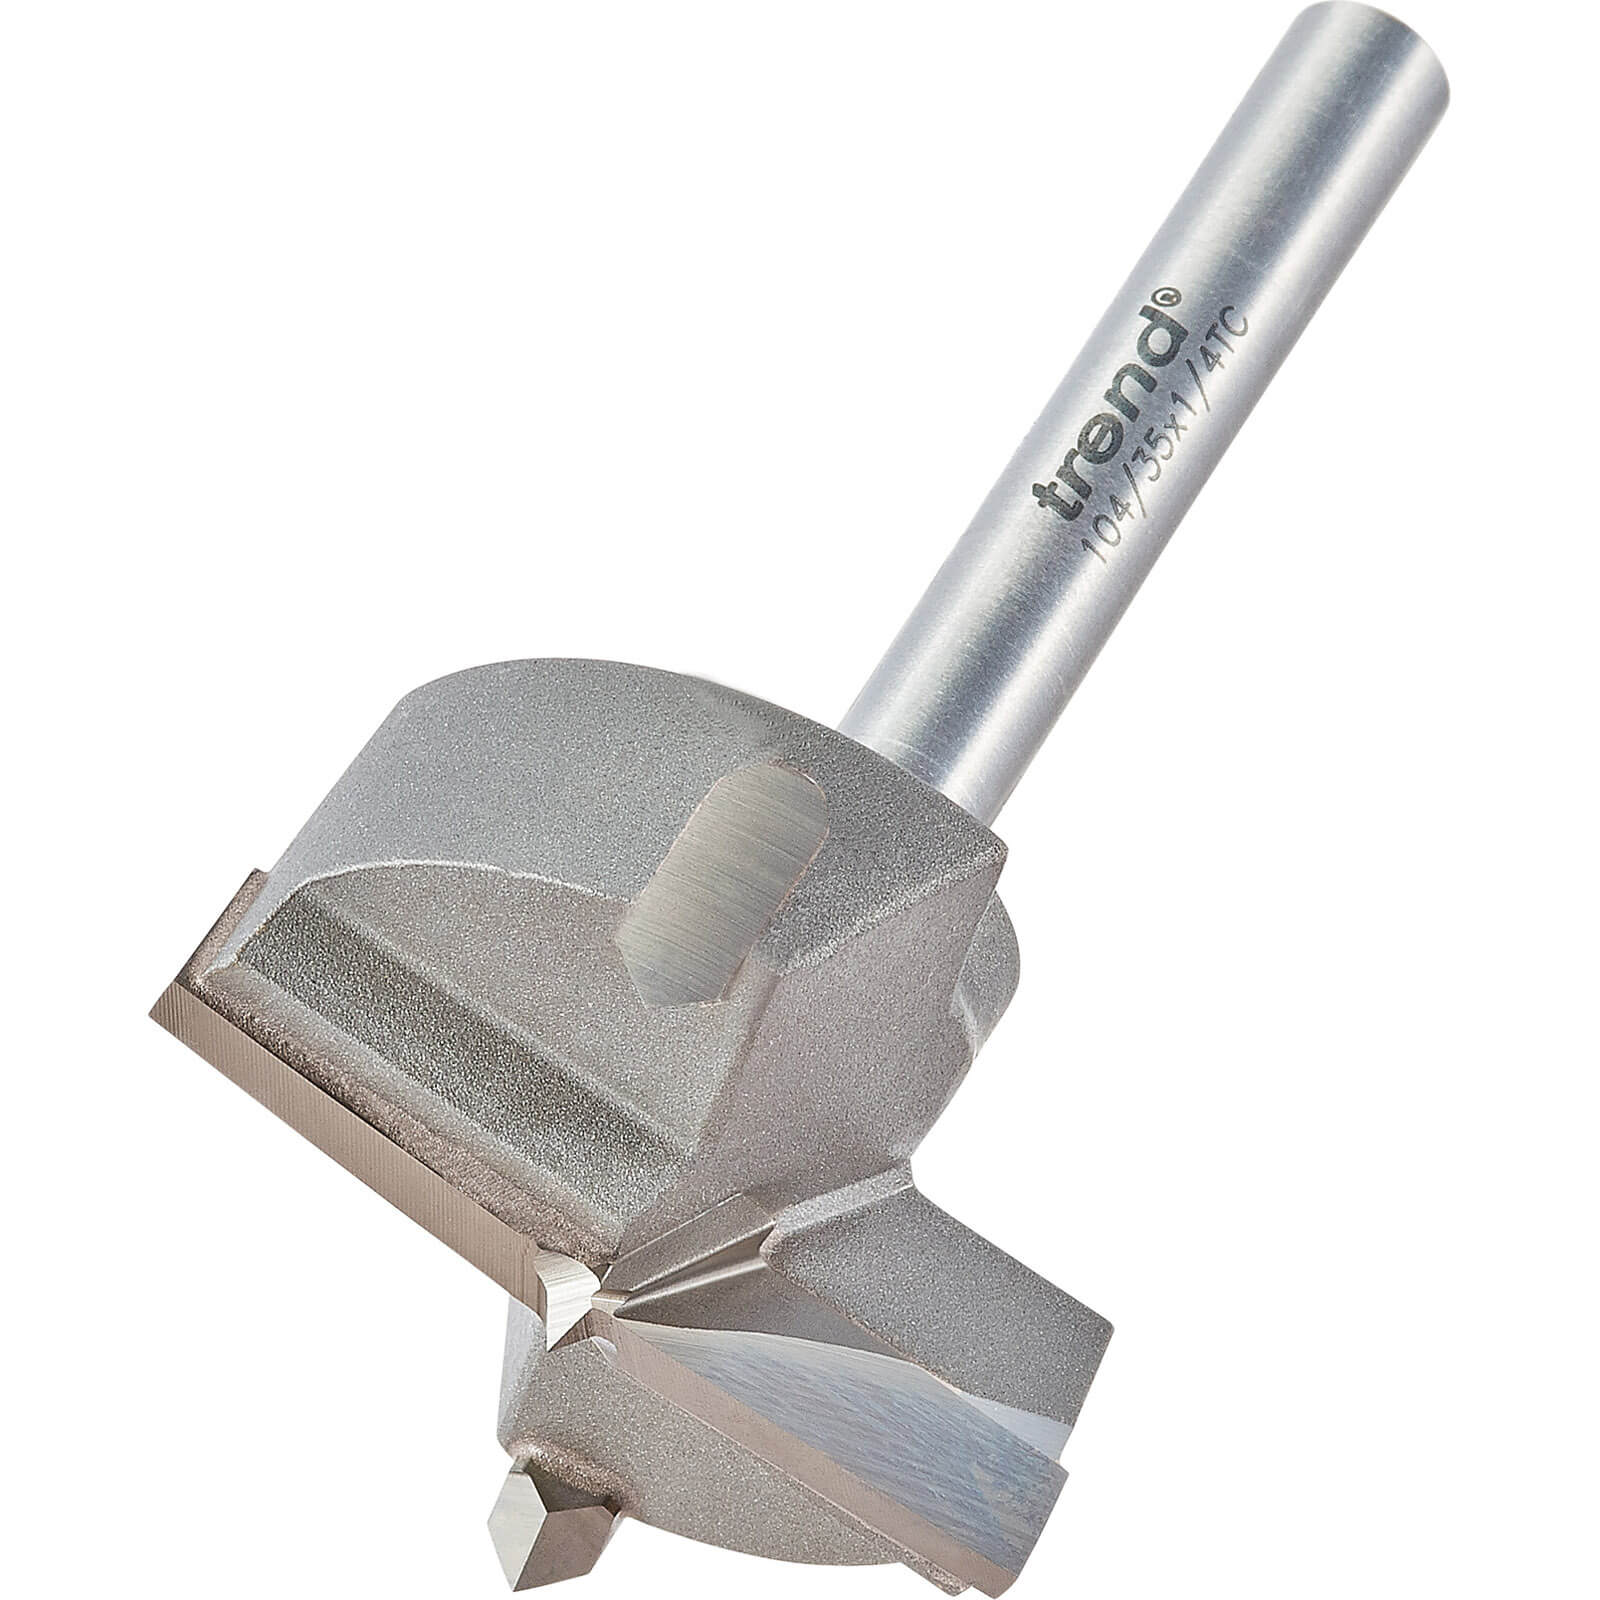 Image of Trend TCT Hinge Sinking Router Bit 35mm 1/4"